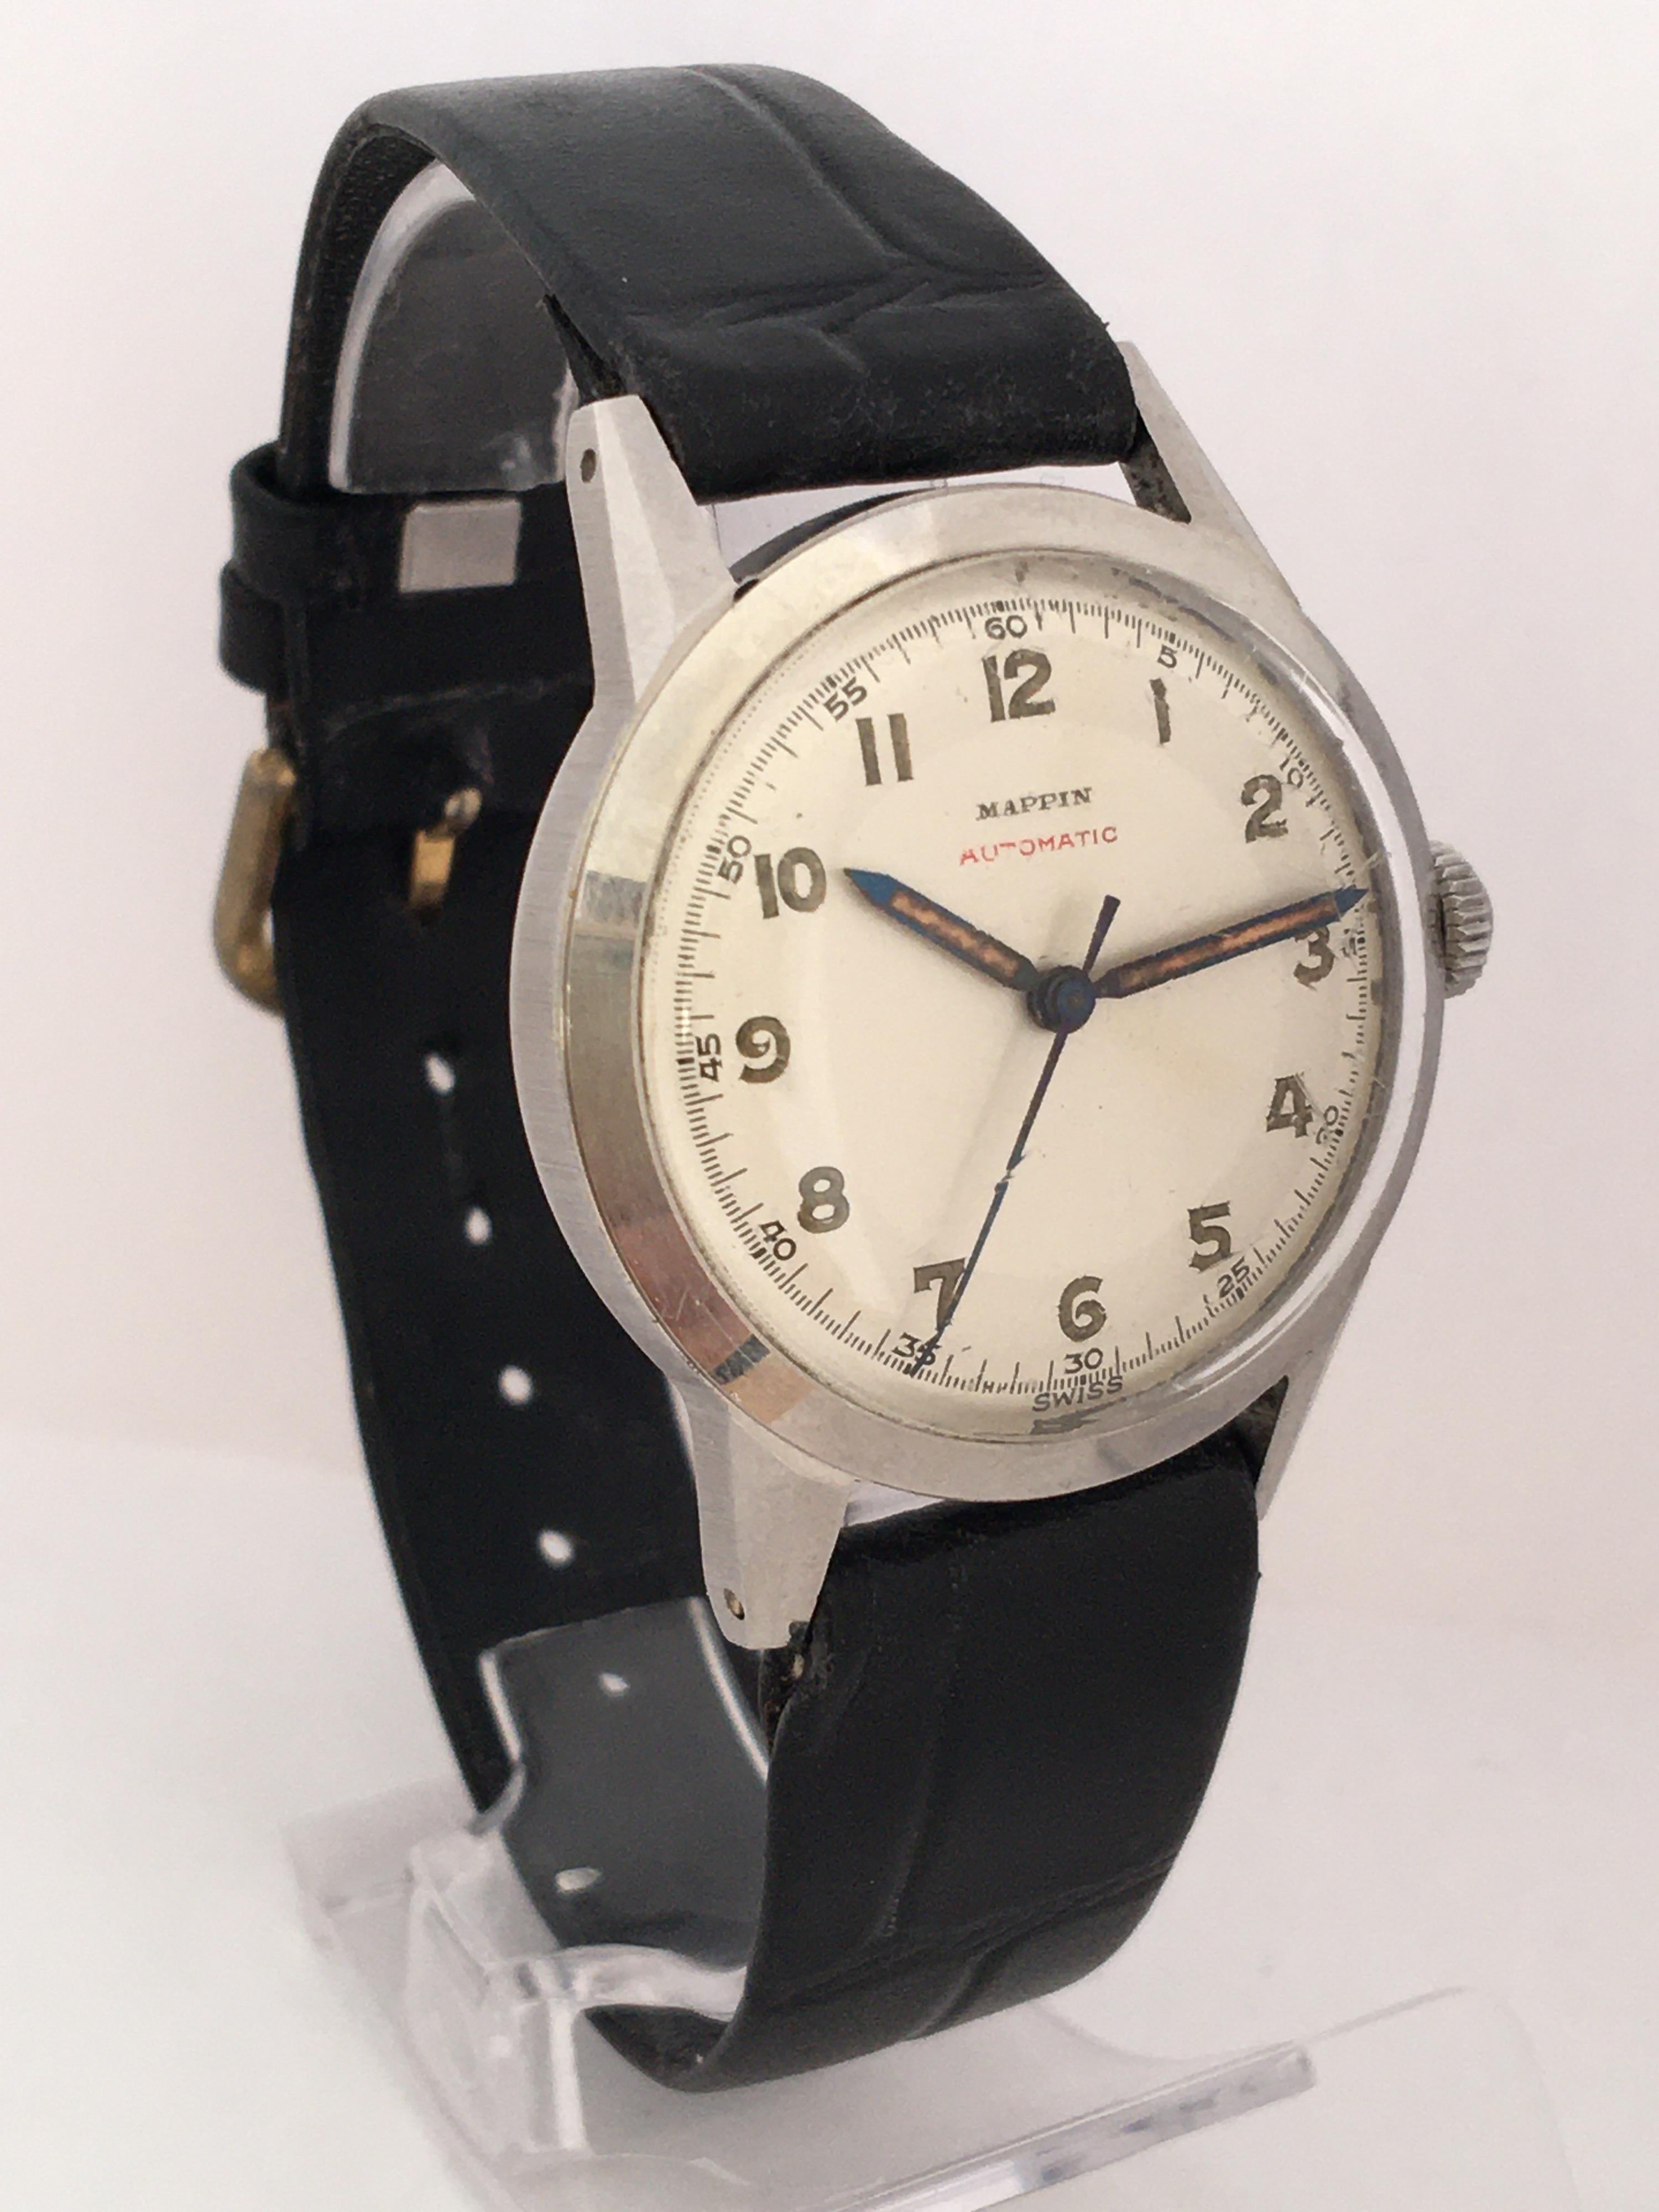 This beautiful and excellent quality pre-owned vintage watch is in good working condition and it is running well. 

This watch shows a sign of ageing and gentle used. The buckle strap is gold plated as shown. Please study the images carefully as